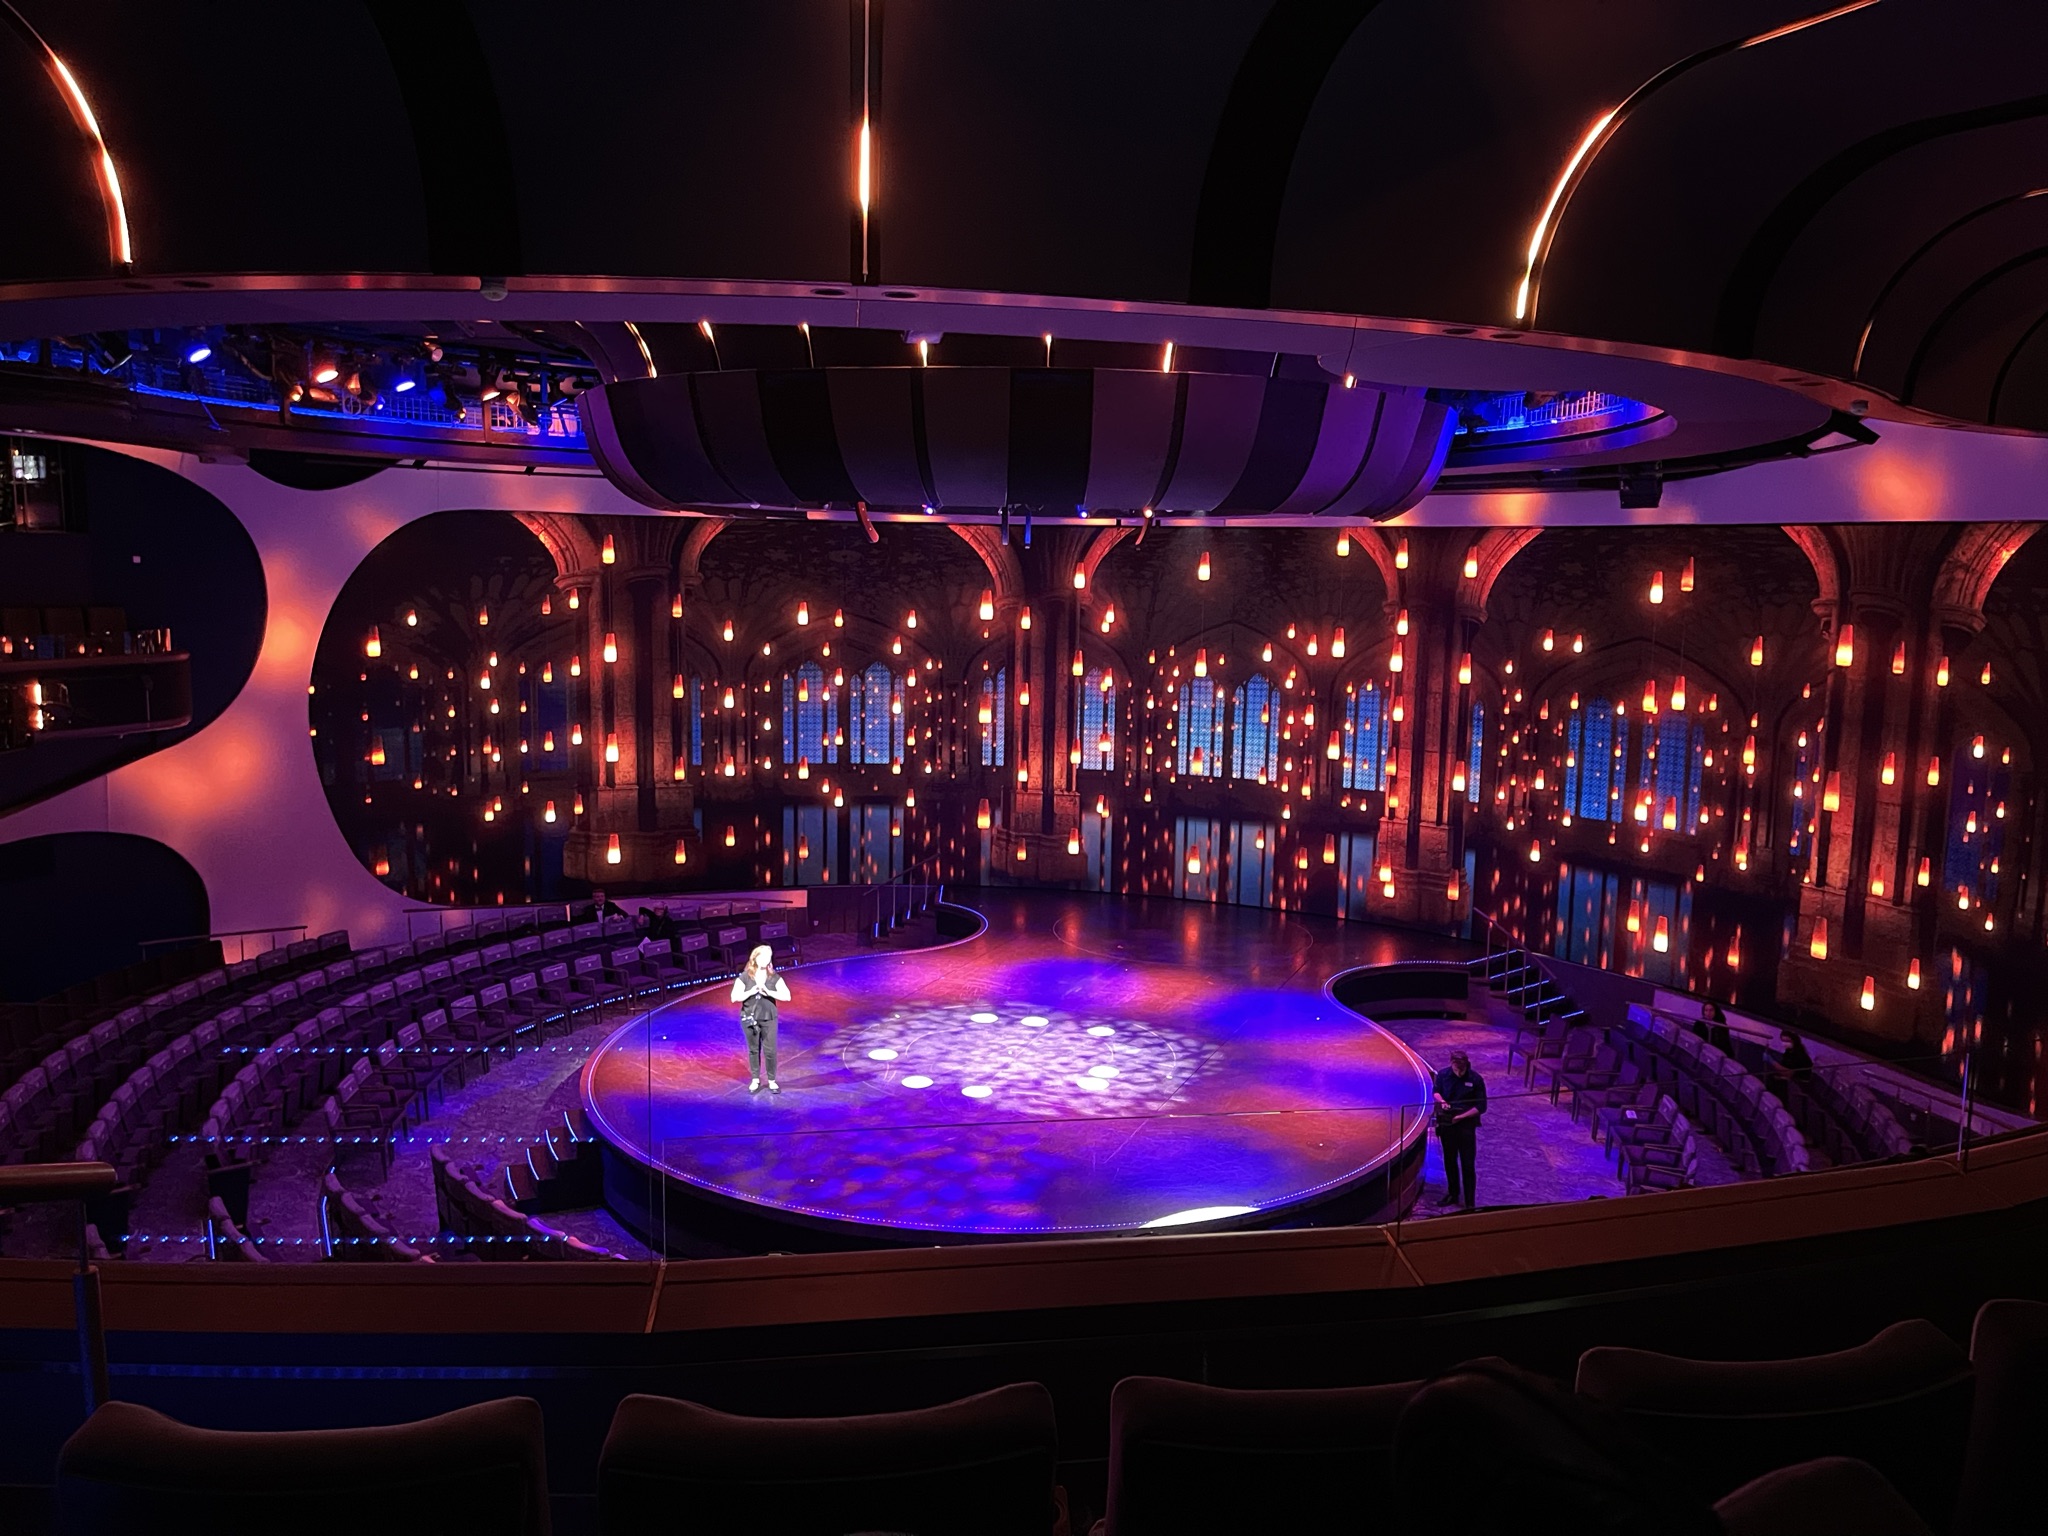 An empty theater with modern architectural features, illuminated by vibrant blue and amber lights, preparing for a performance.